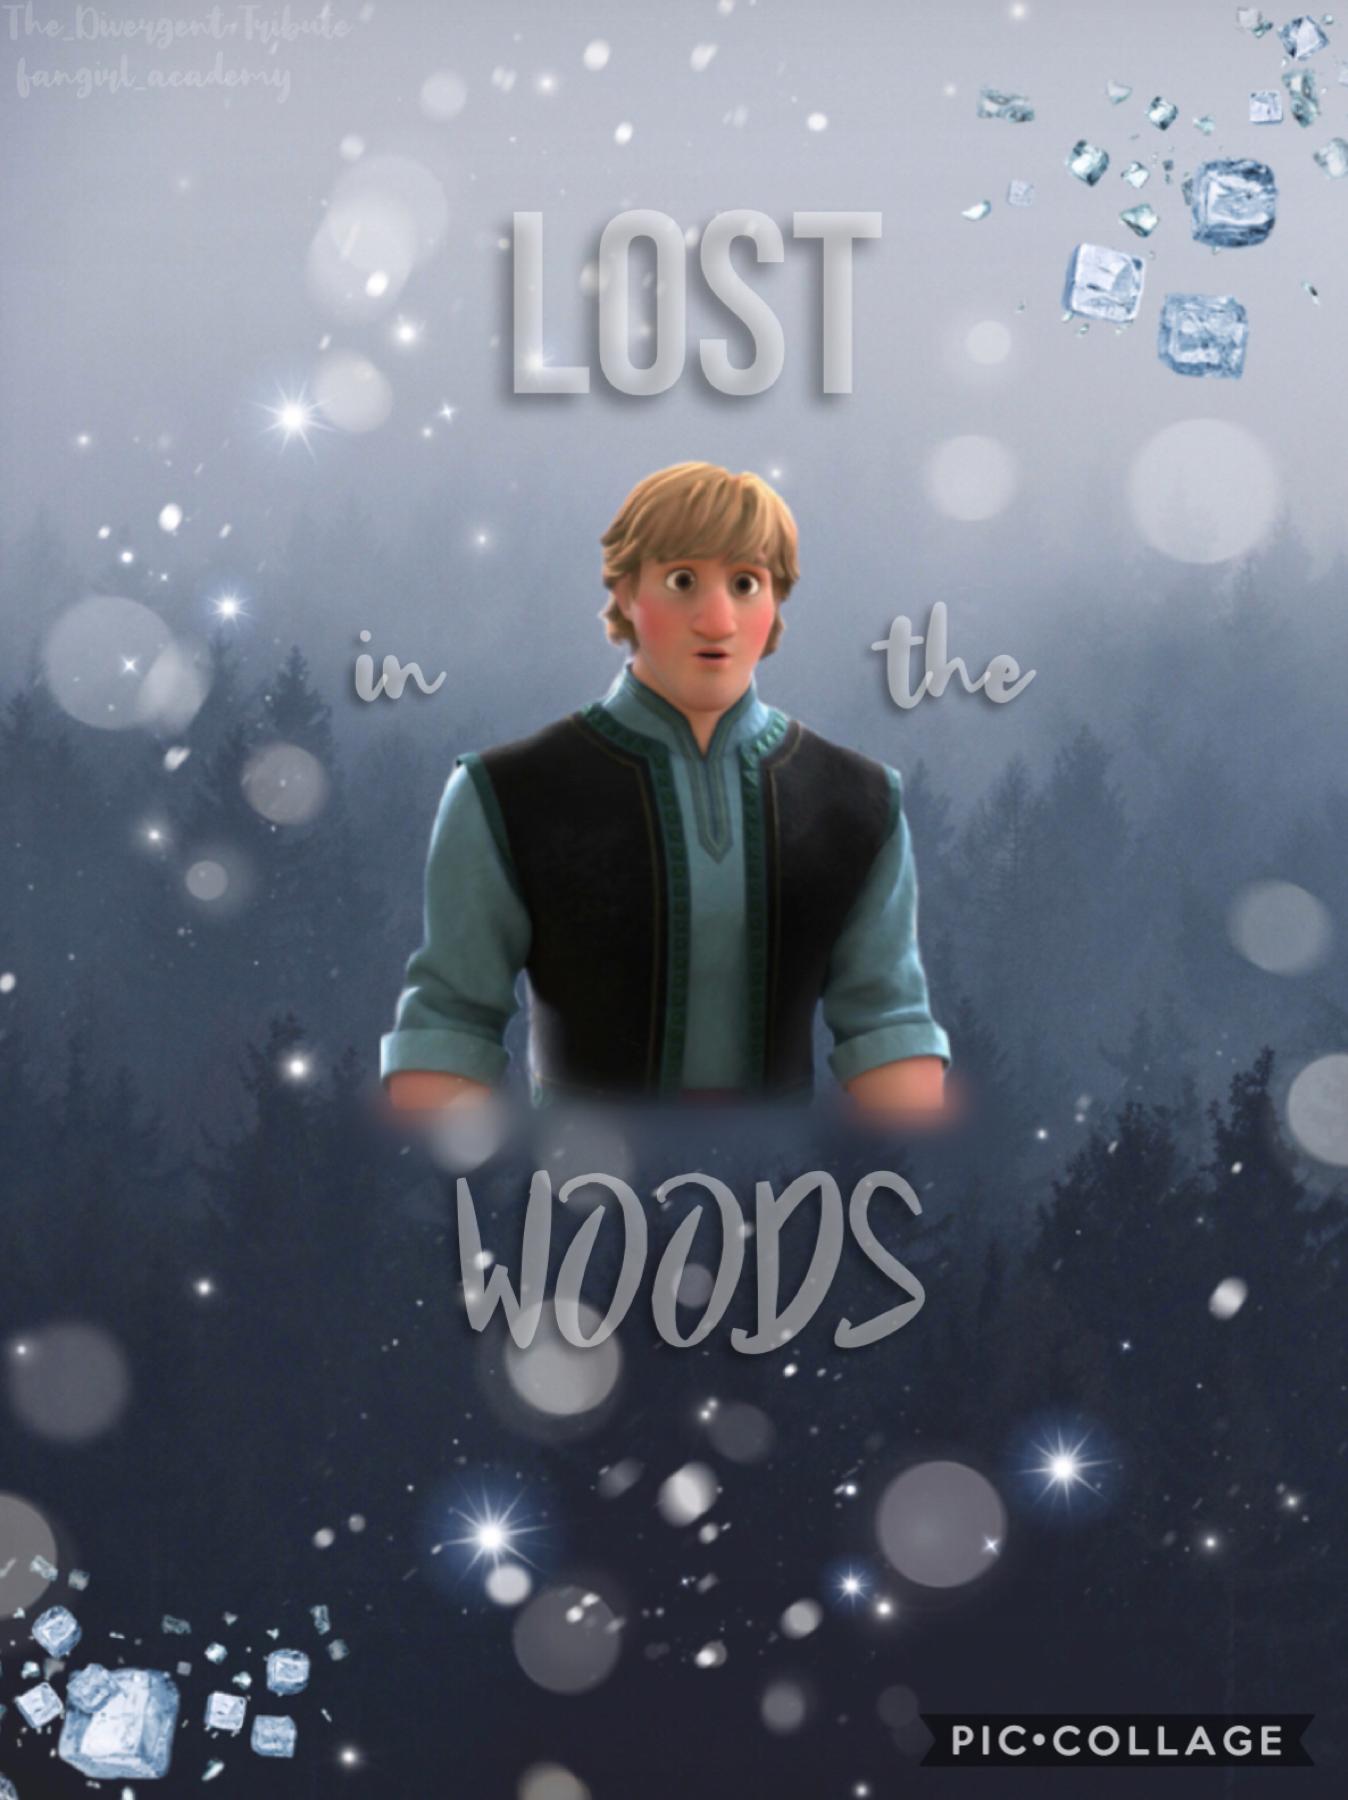 Here’s a Kristoff edit! I absolutely love him in Frozen 2!!      (Tap)
QOTD: Which Frozen 2 character should I do next?

🌲Rate /10?🌲
